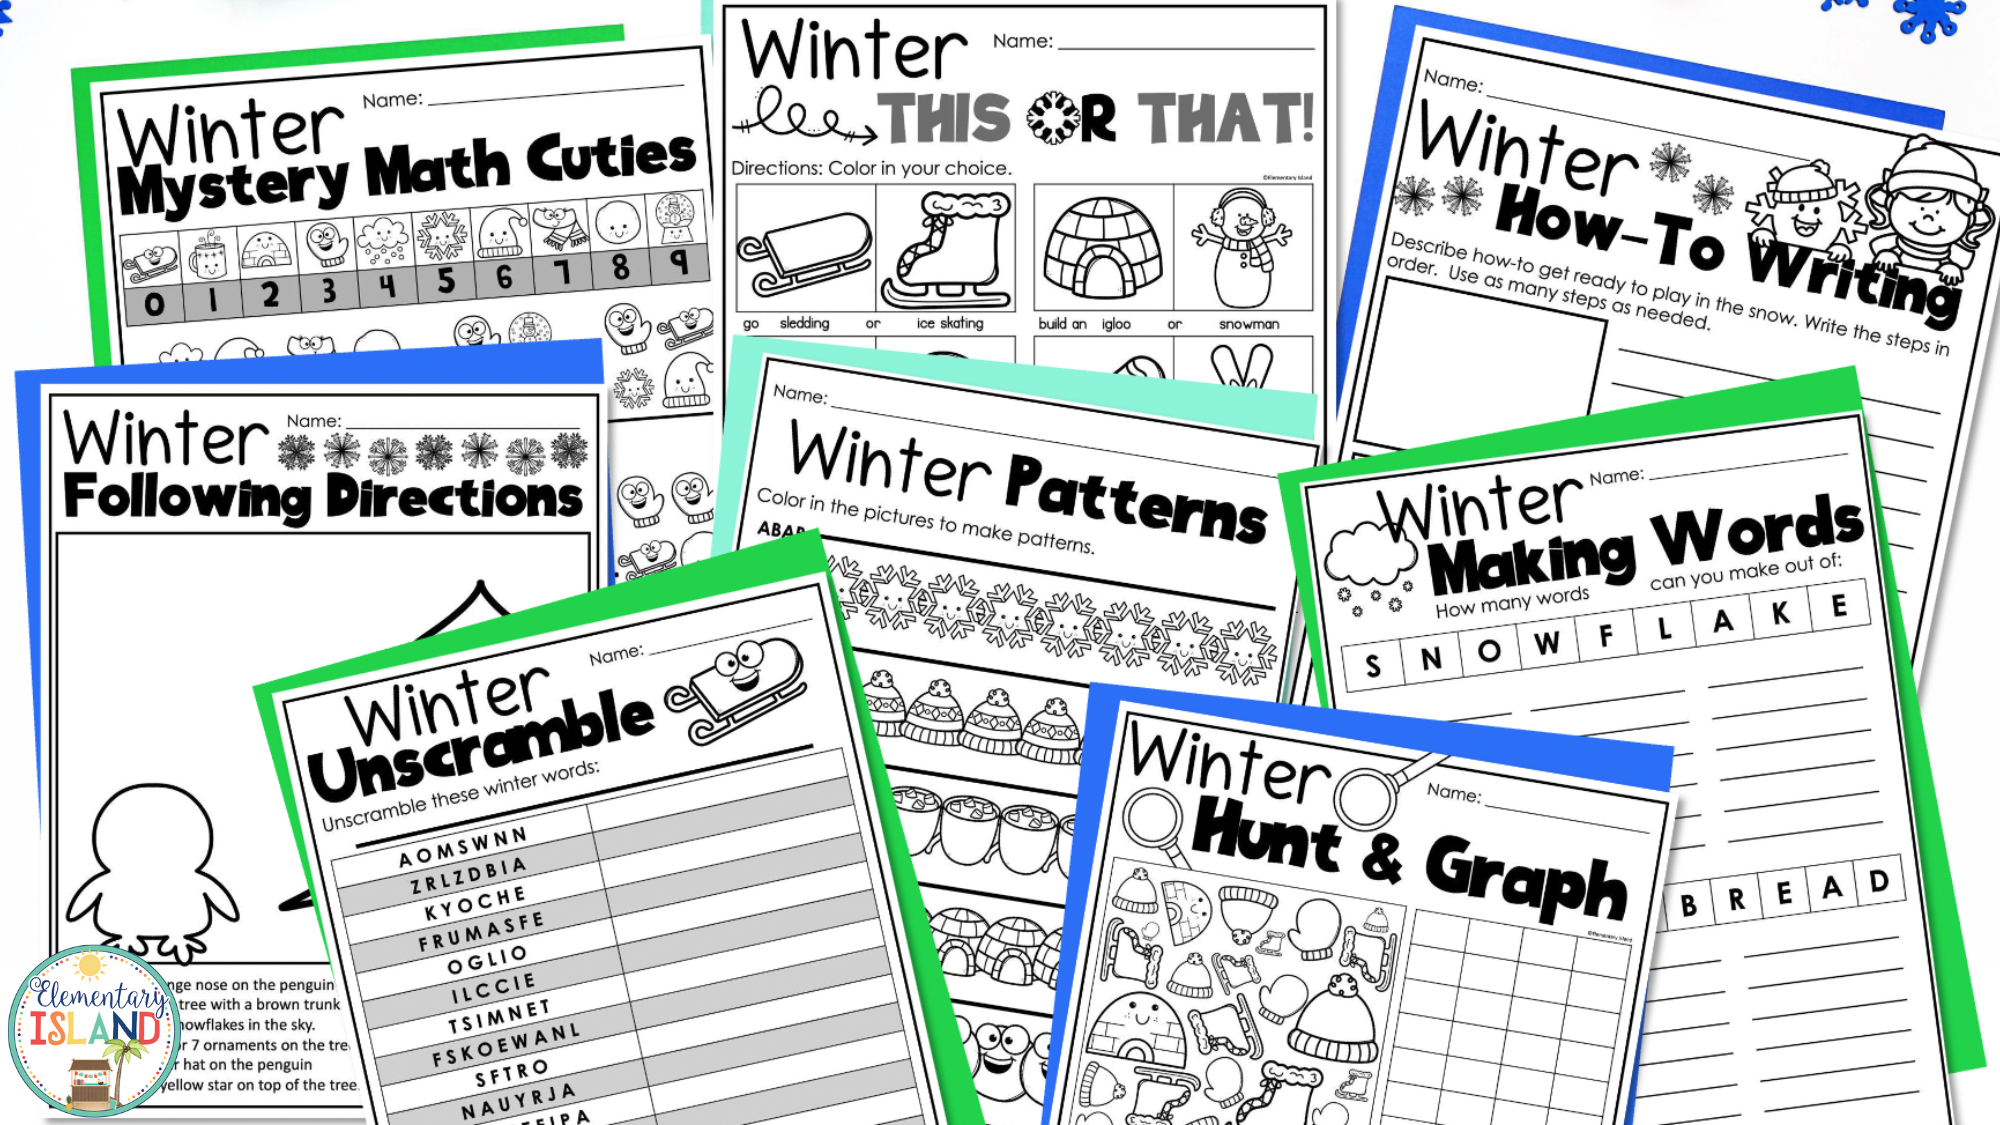 Holiday fun packets include everything you need for easy activities for substitute teachers.